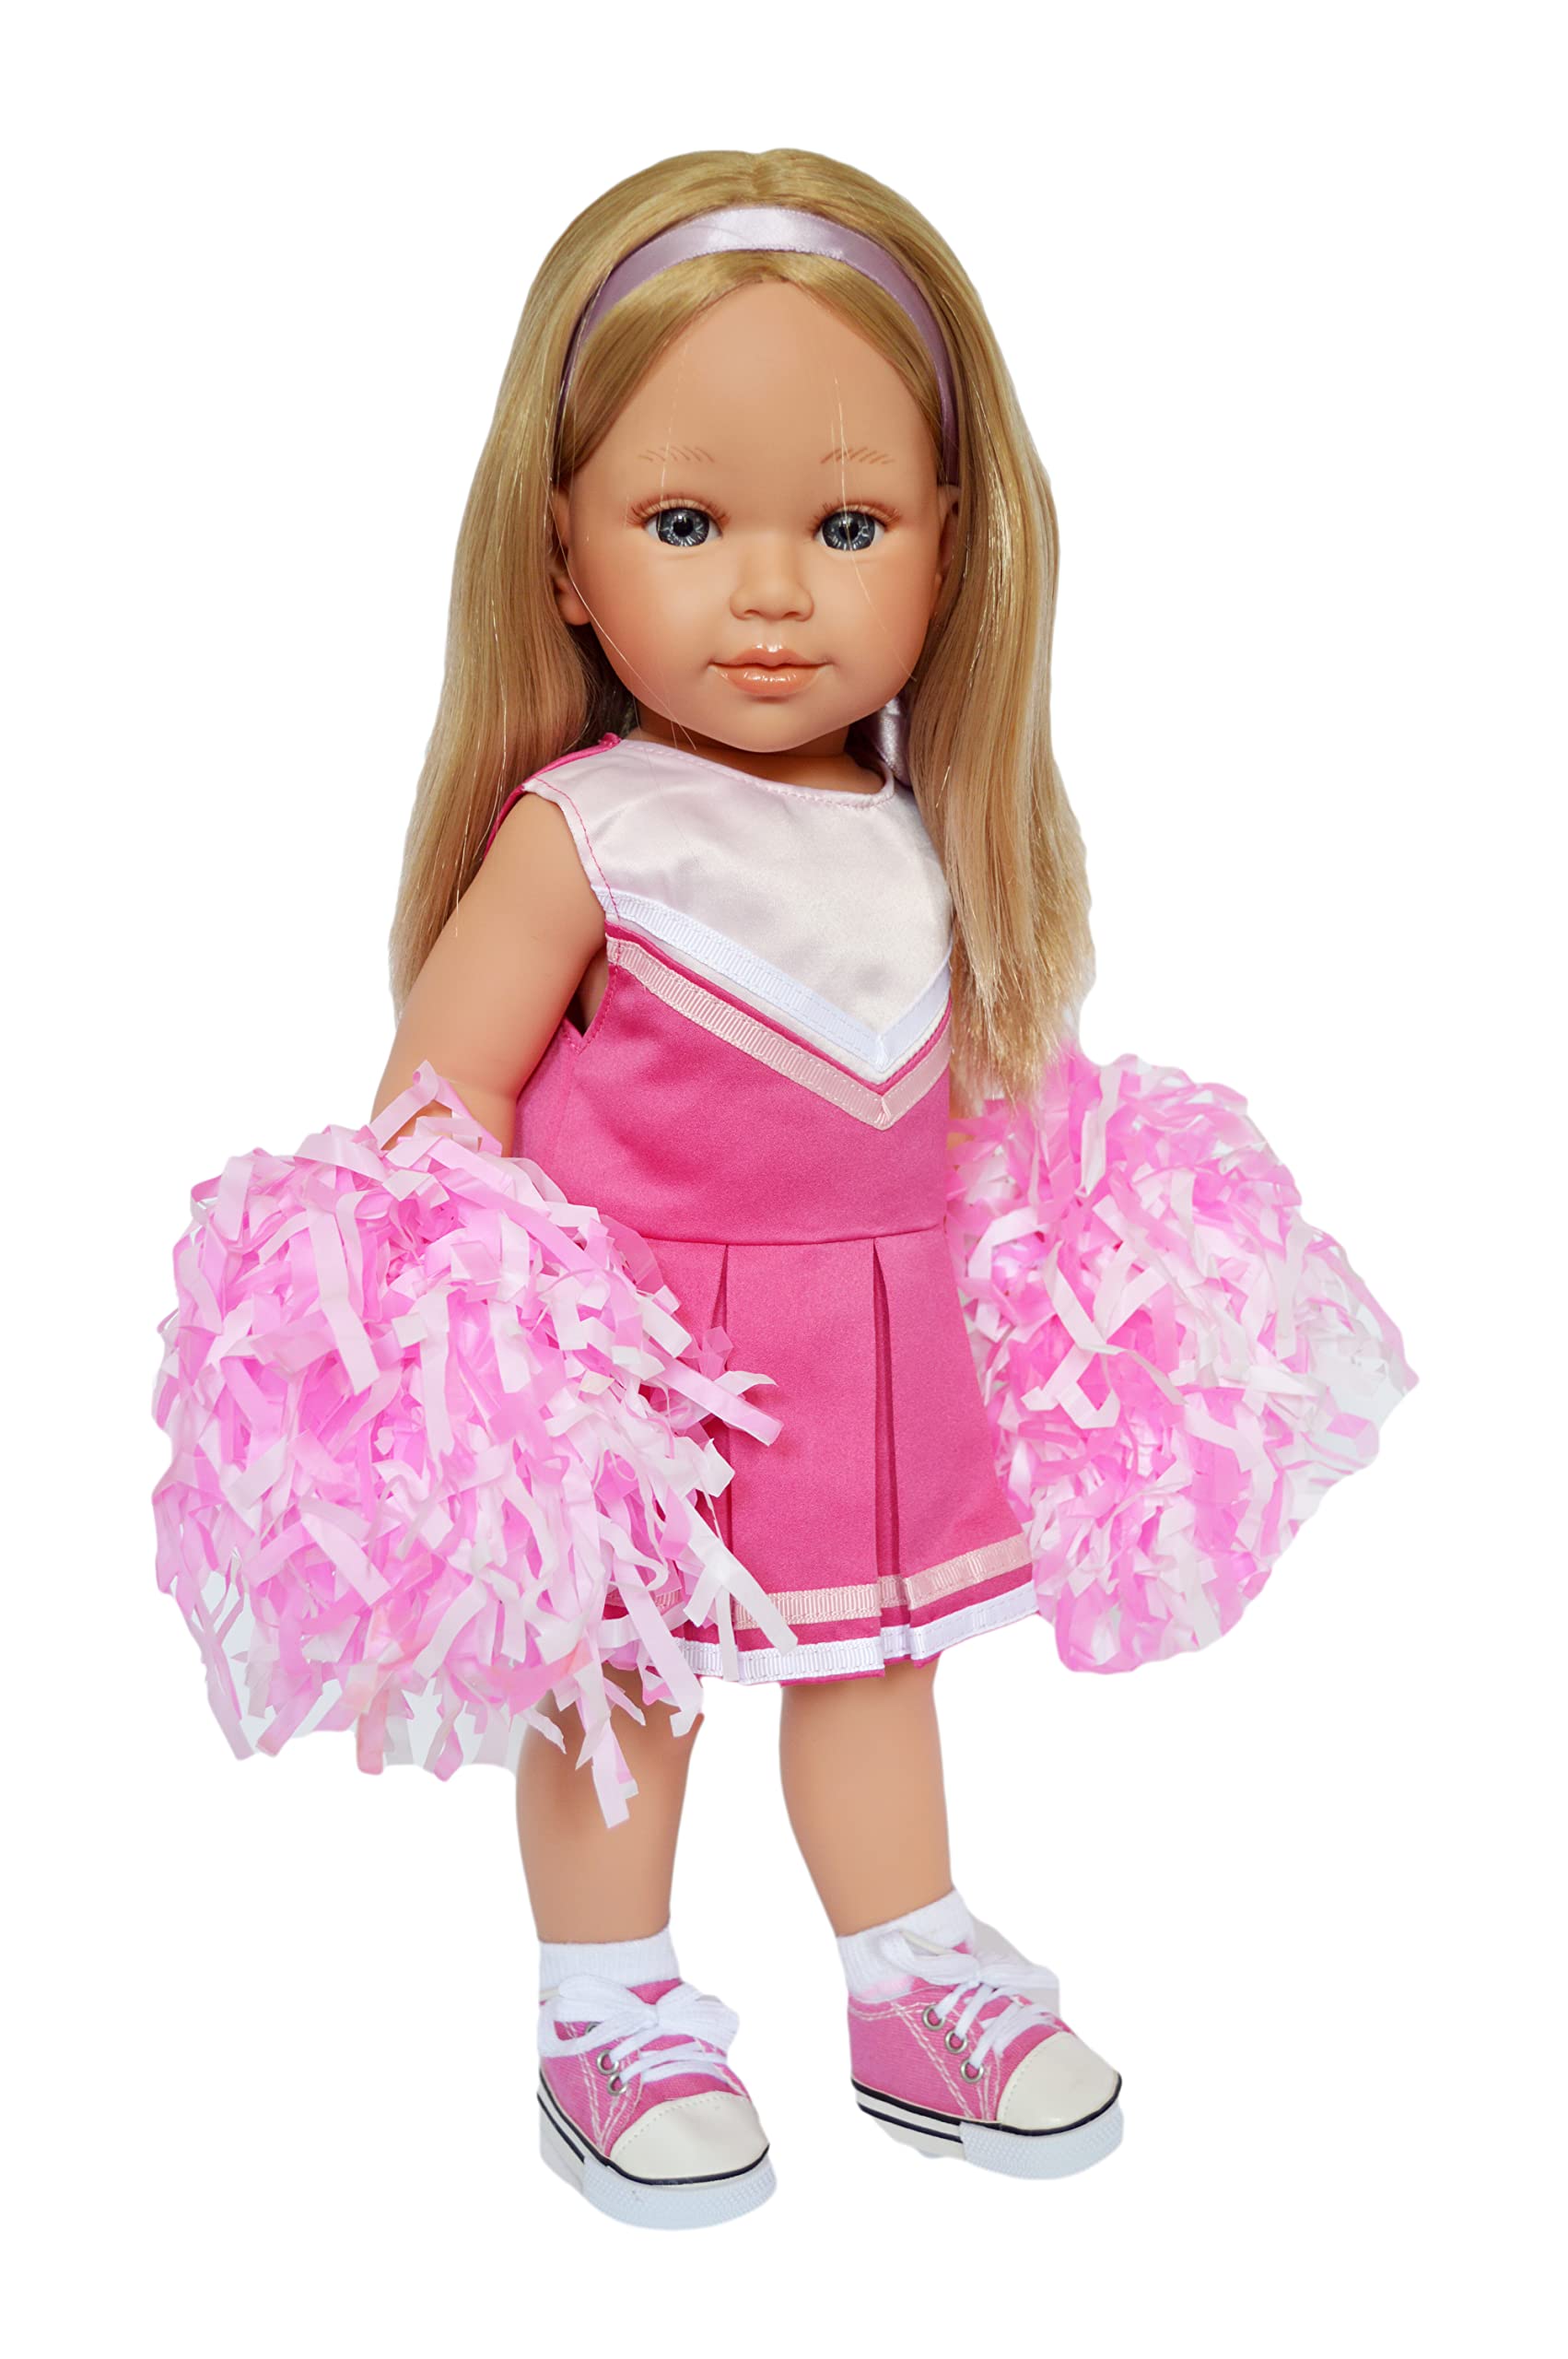 18 Inch Doll Clothes- Pink Cheerleader Outfit Fits 18 Inch Fashion Girl Dolls